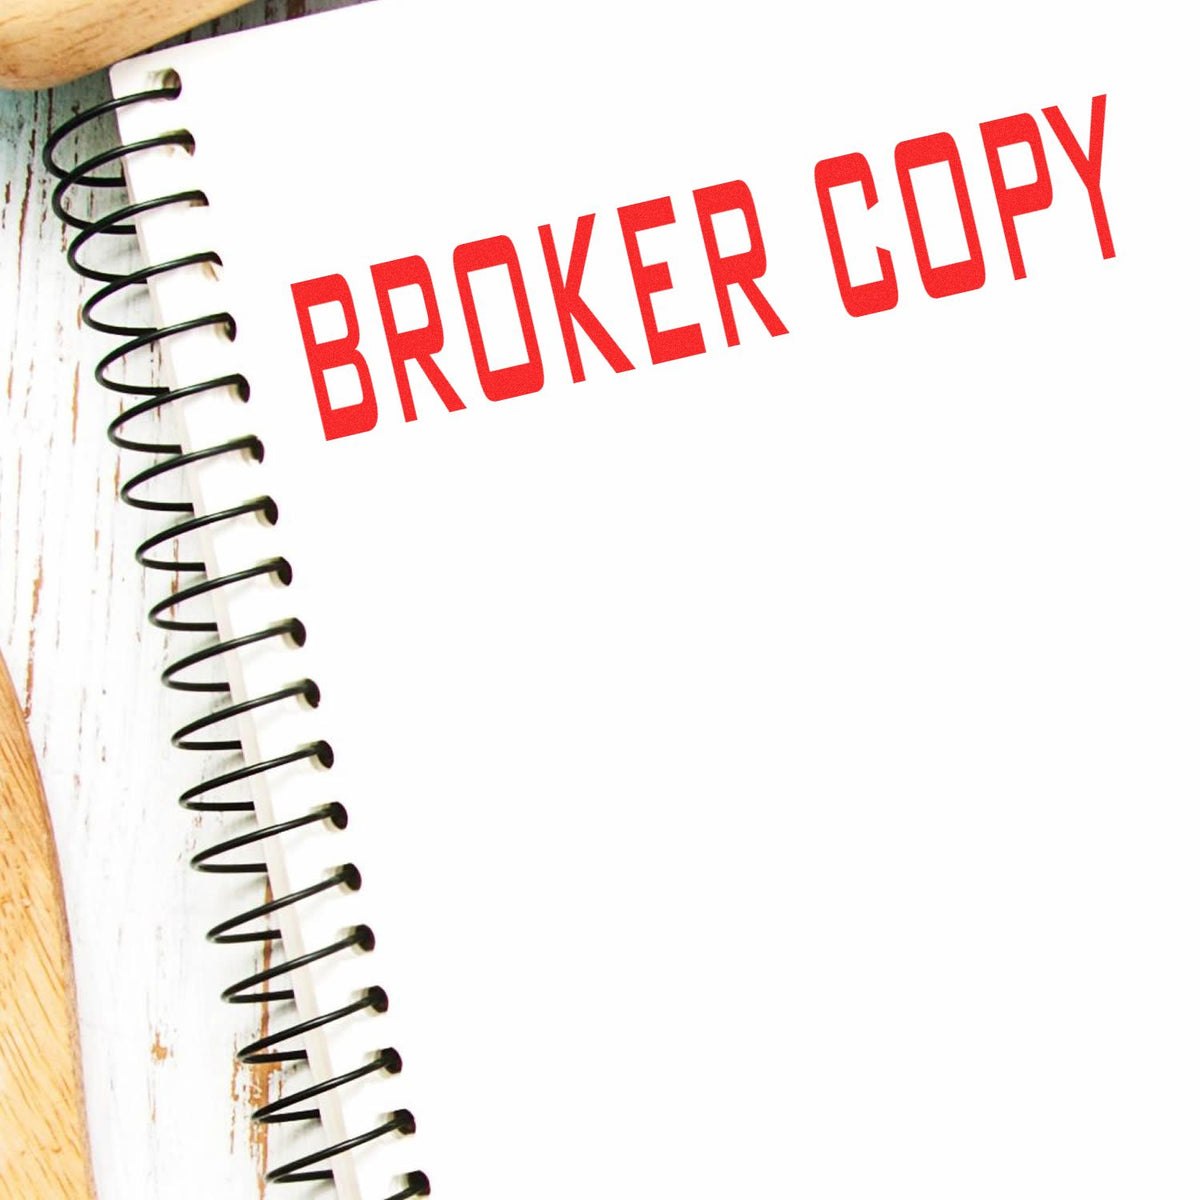 Self-Inking Broker Copy Stamp In Use Photo